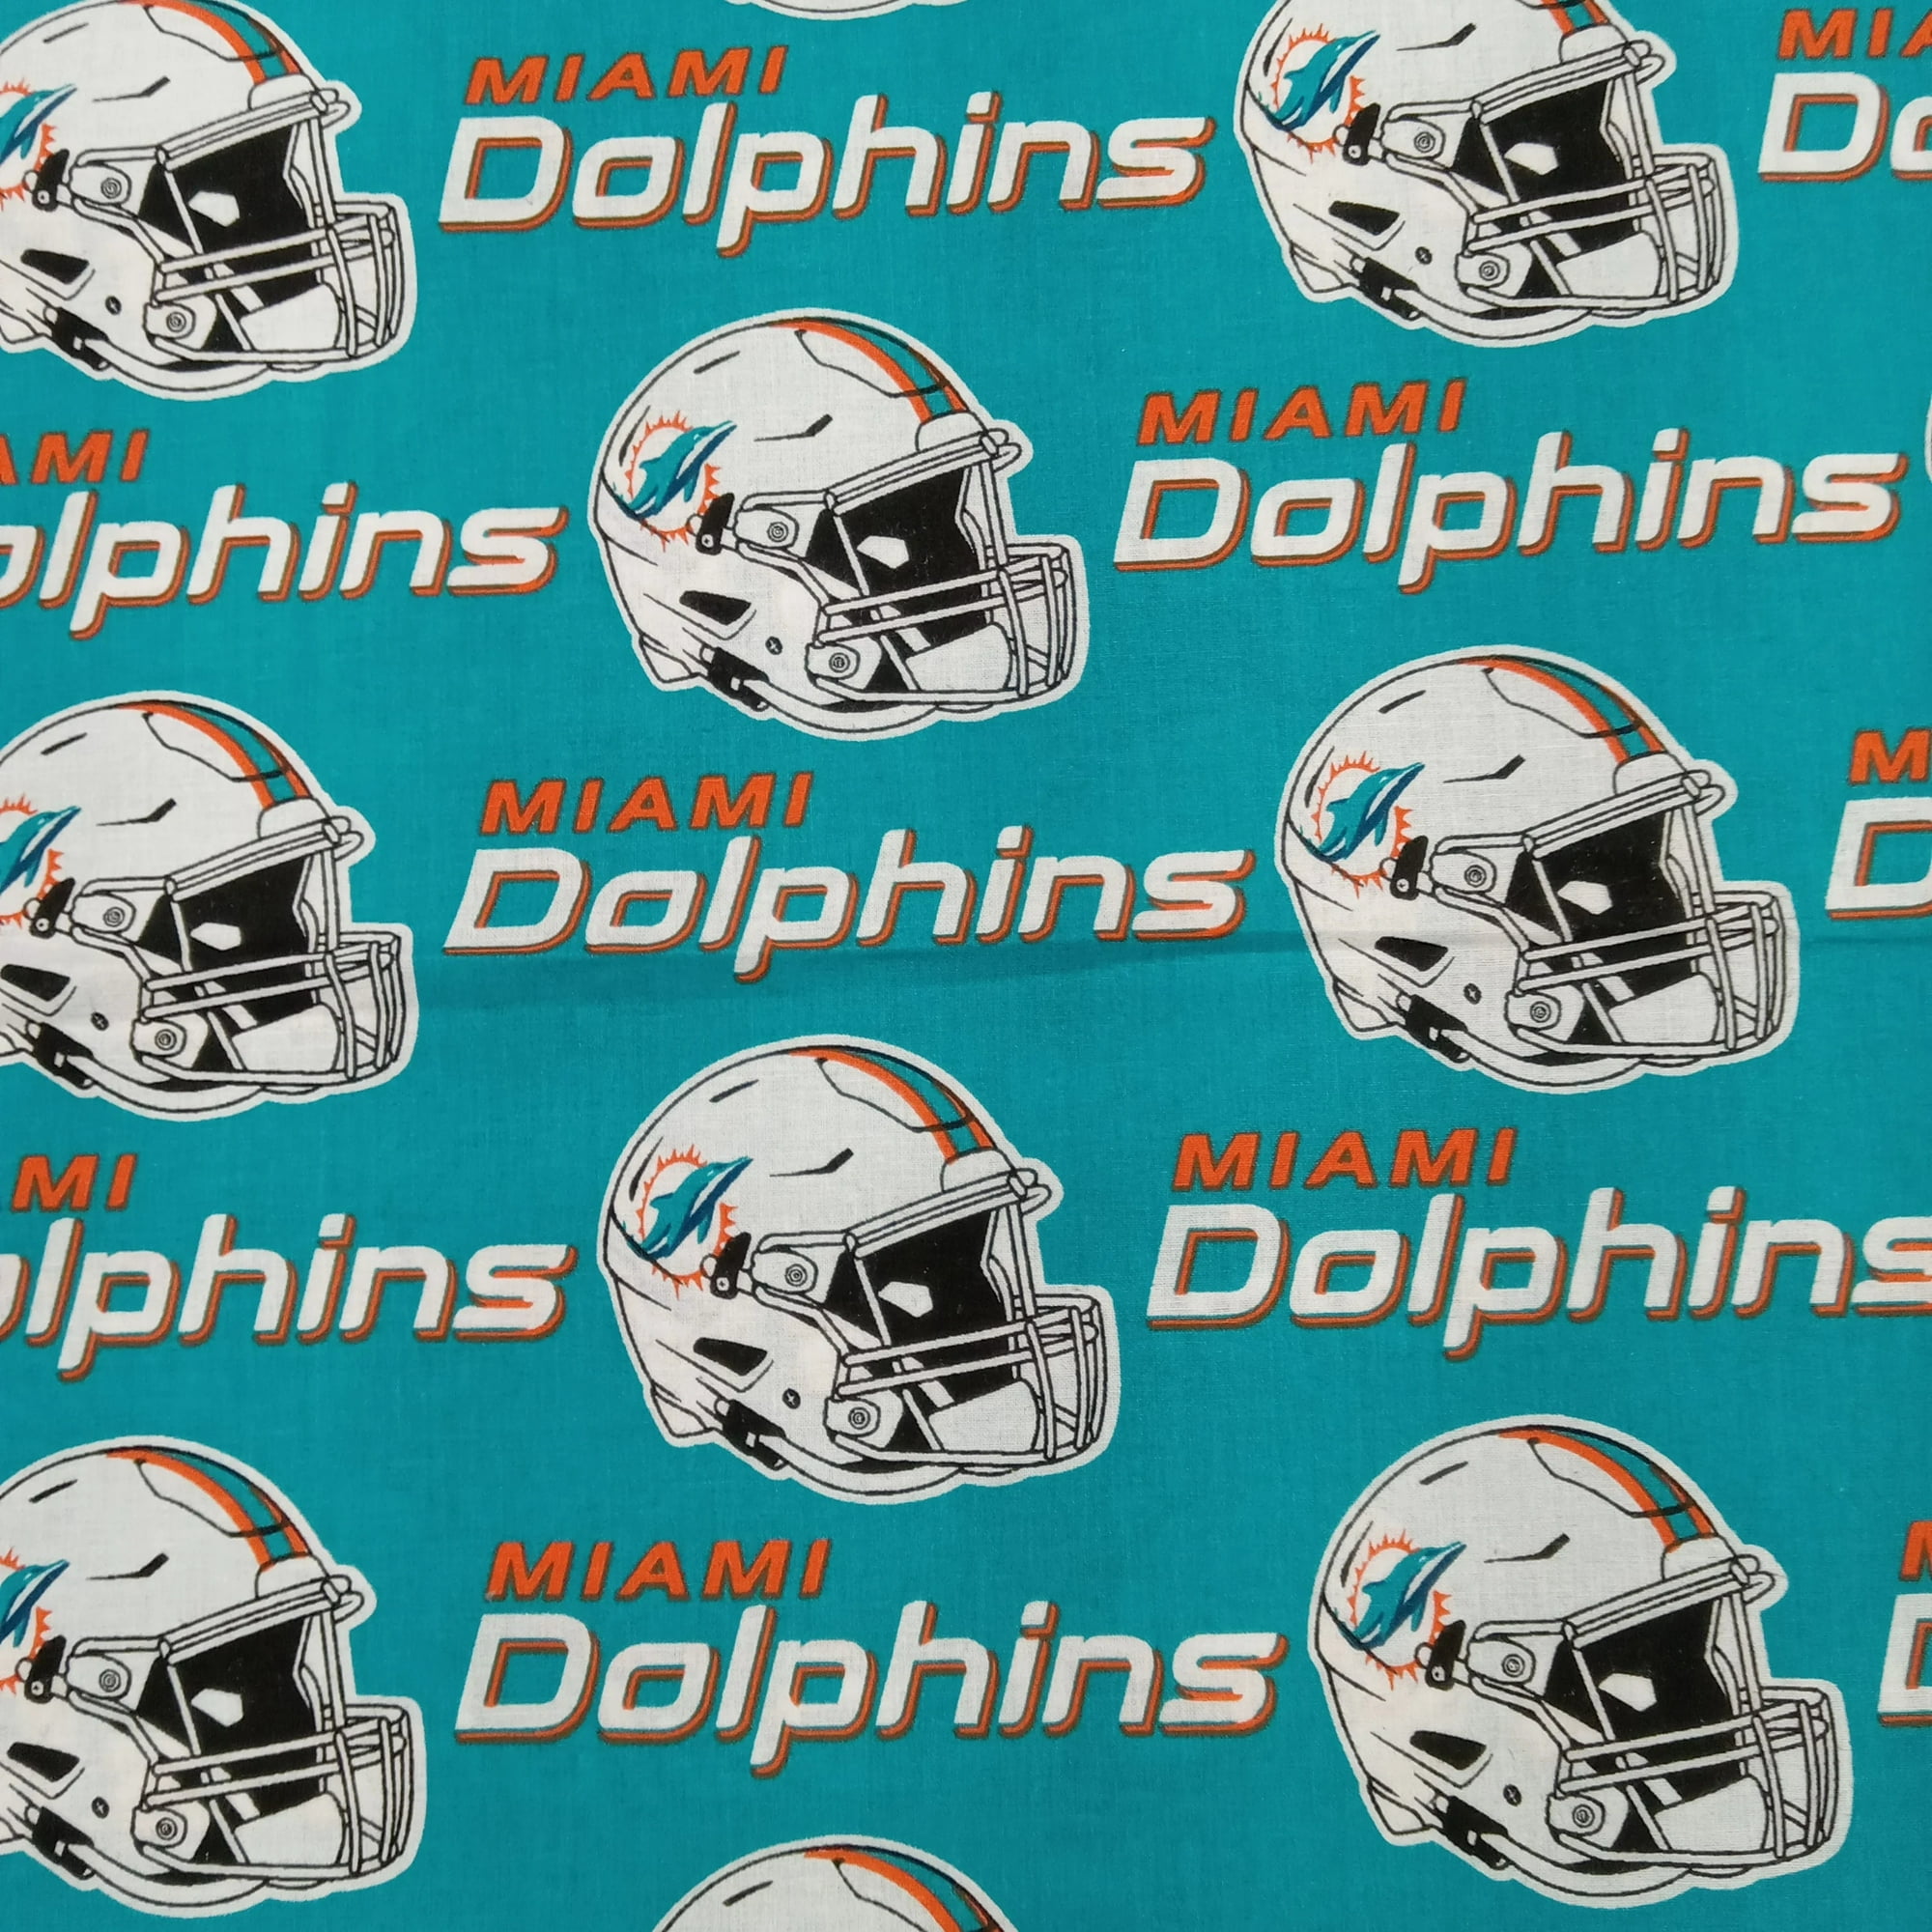 Miami Dolphins on X: And for those who want a new background for